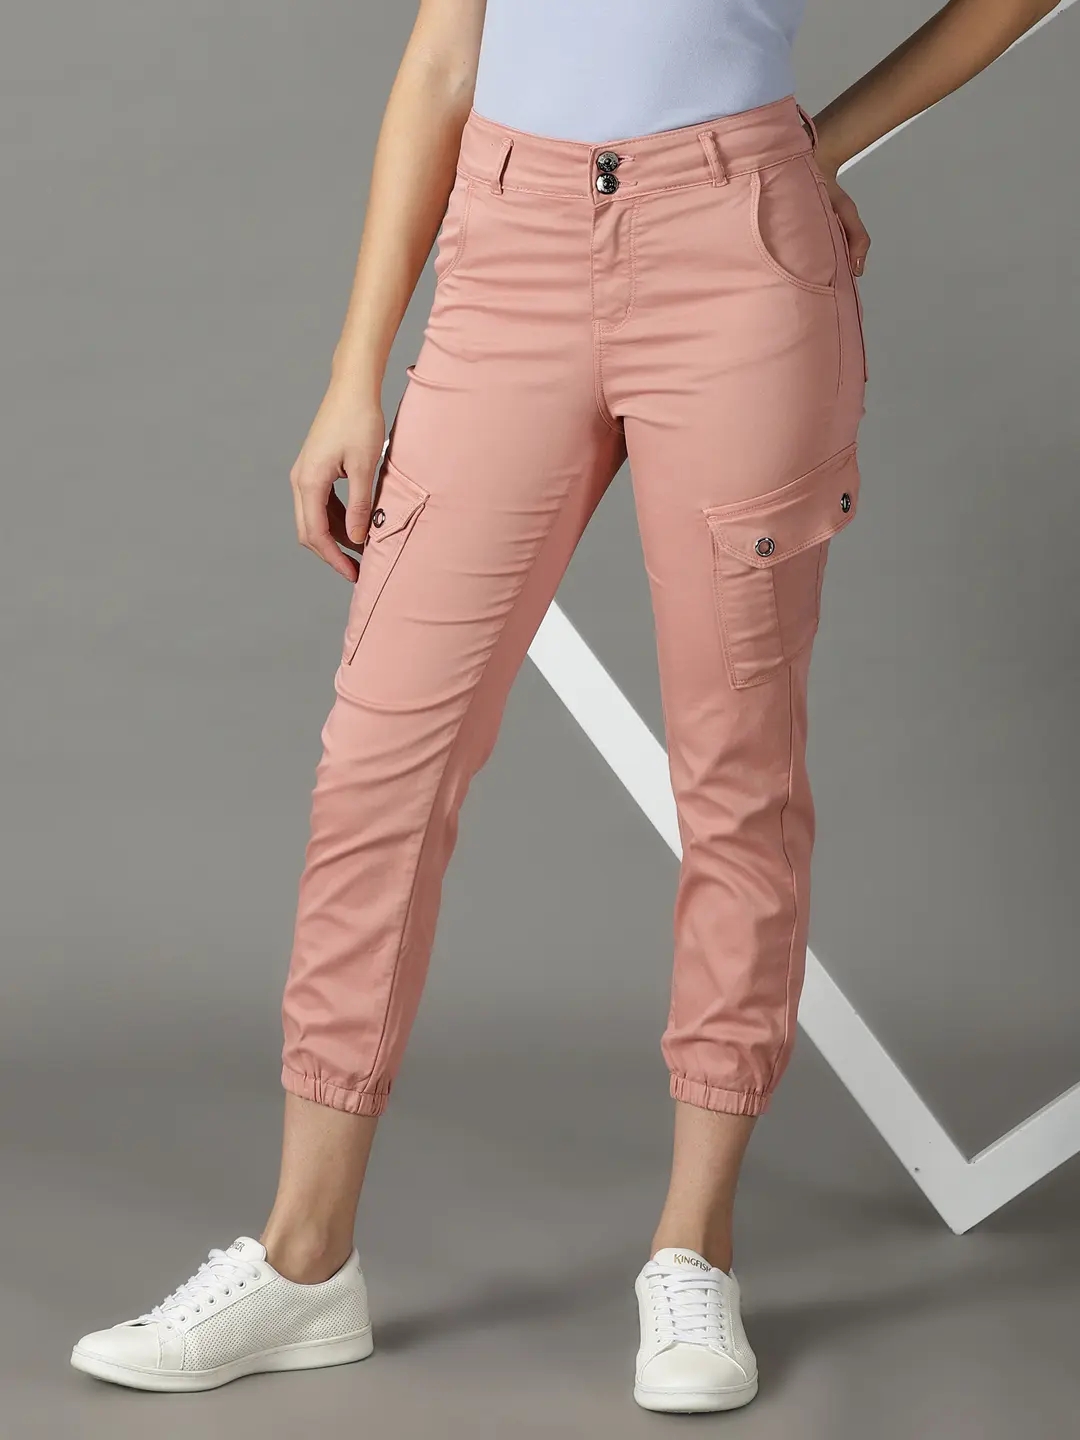 SHOWOFF Women's Stretchable Clean Look Pink Jogger Jeans